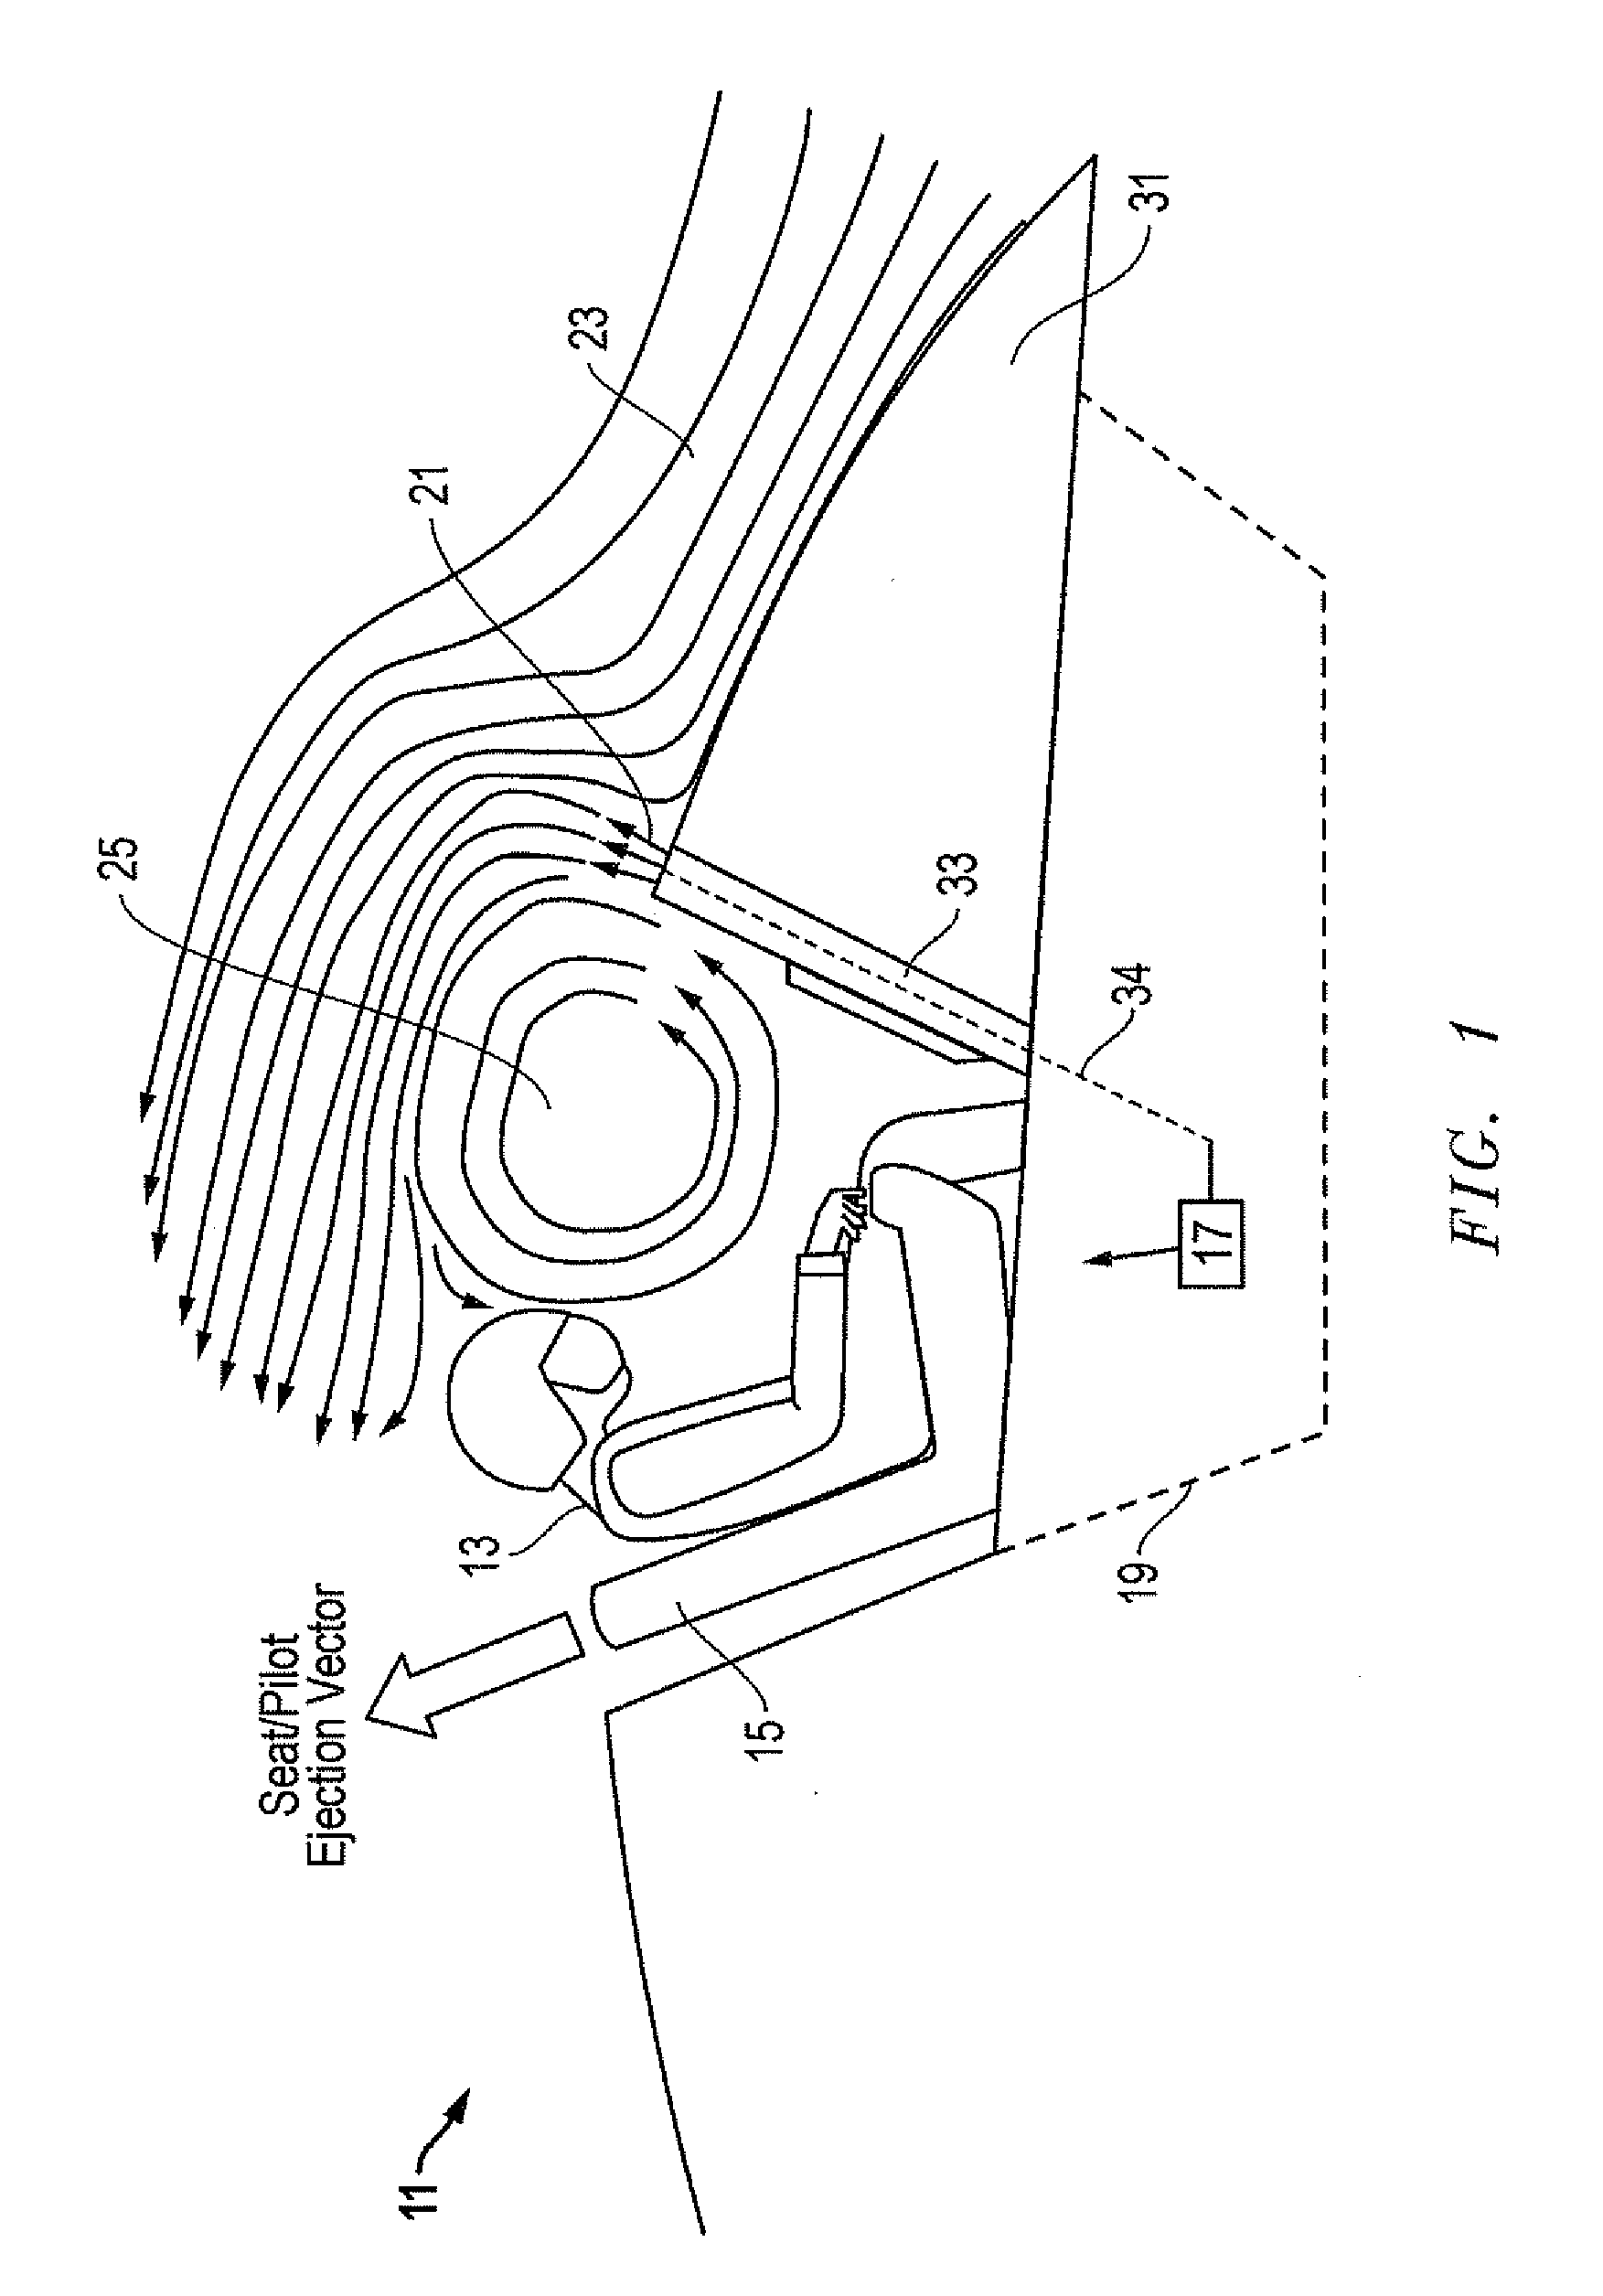 System, method and apparatus for windblast reduction during release or ejection from aircraft